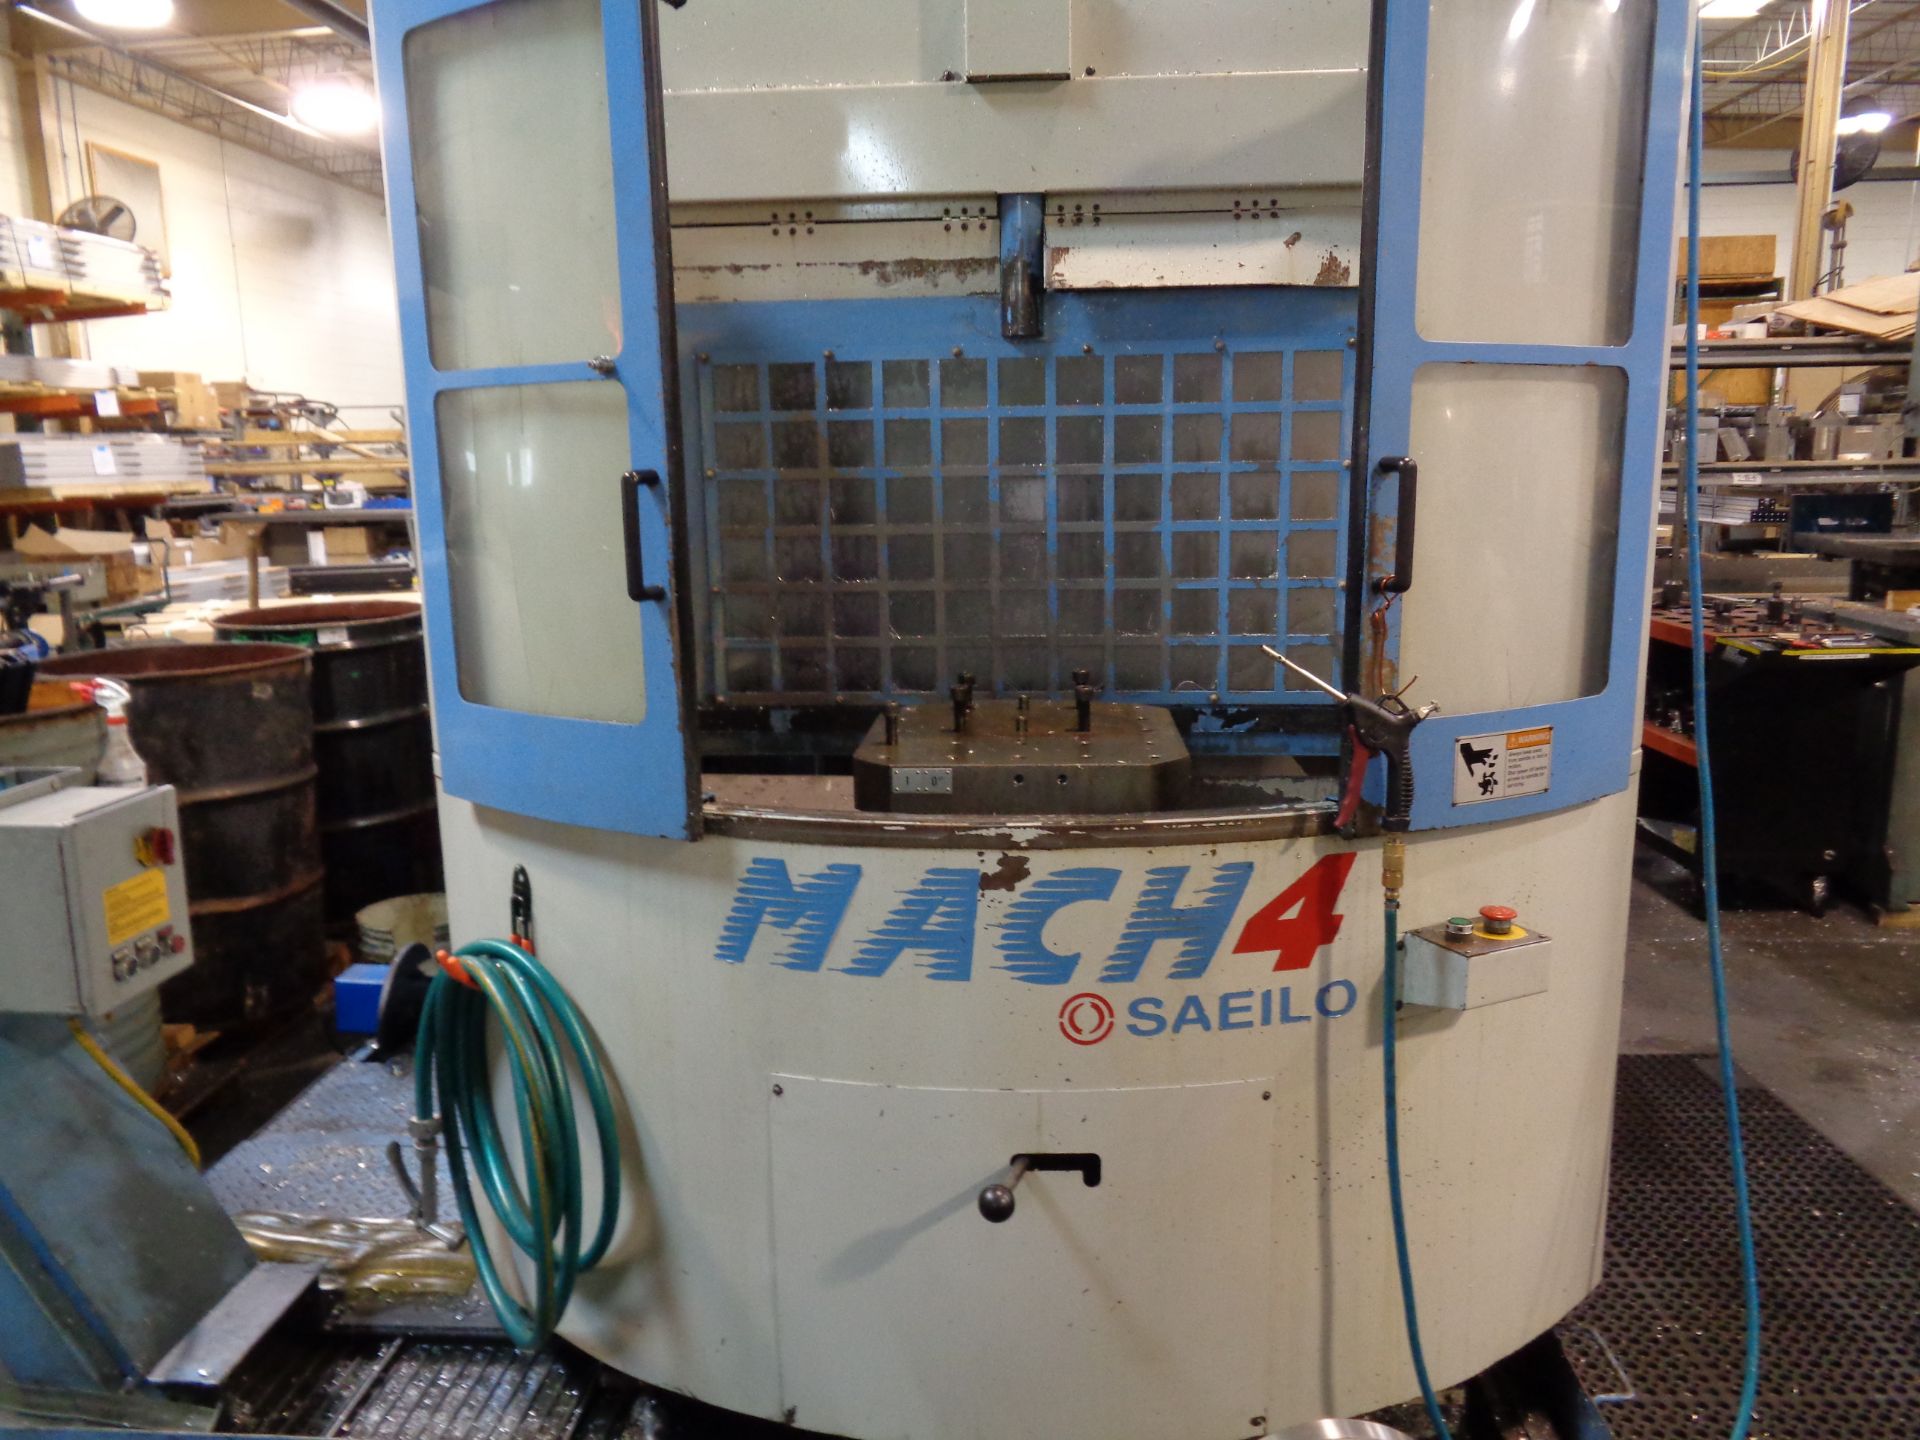 SAEILO Mach 4 Horizontal Cnc Machining Center - FANUC Control ( Being Sold Off Site ) - Image 2 of 14